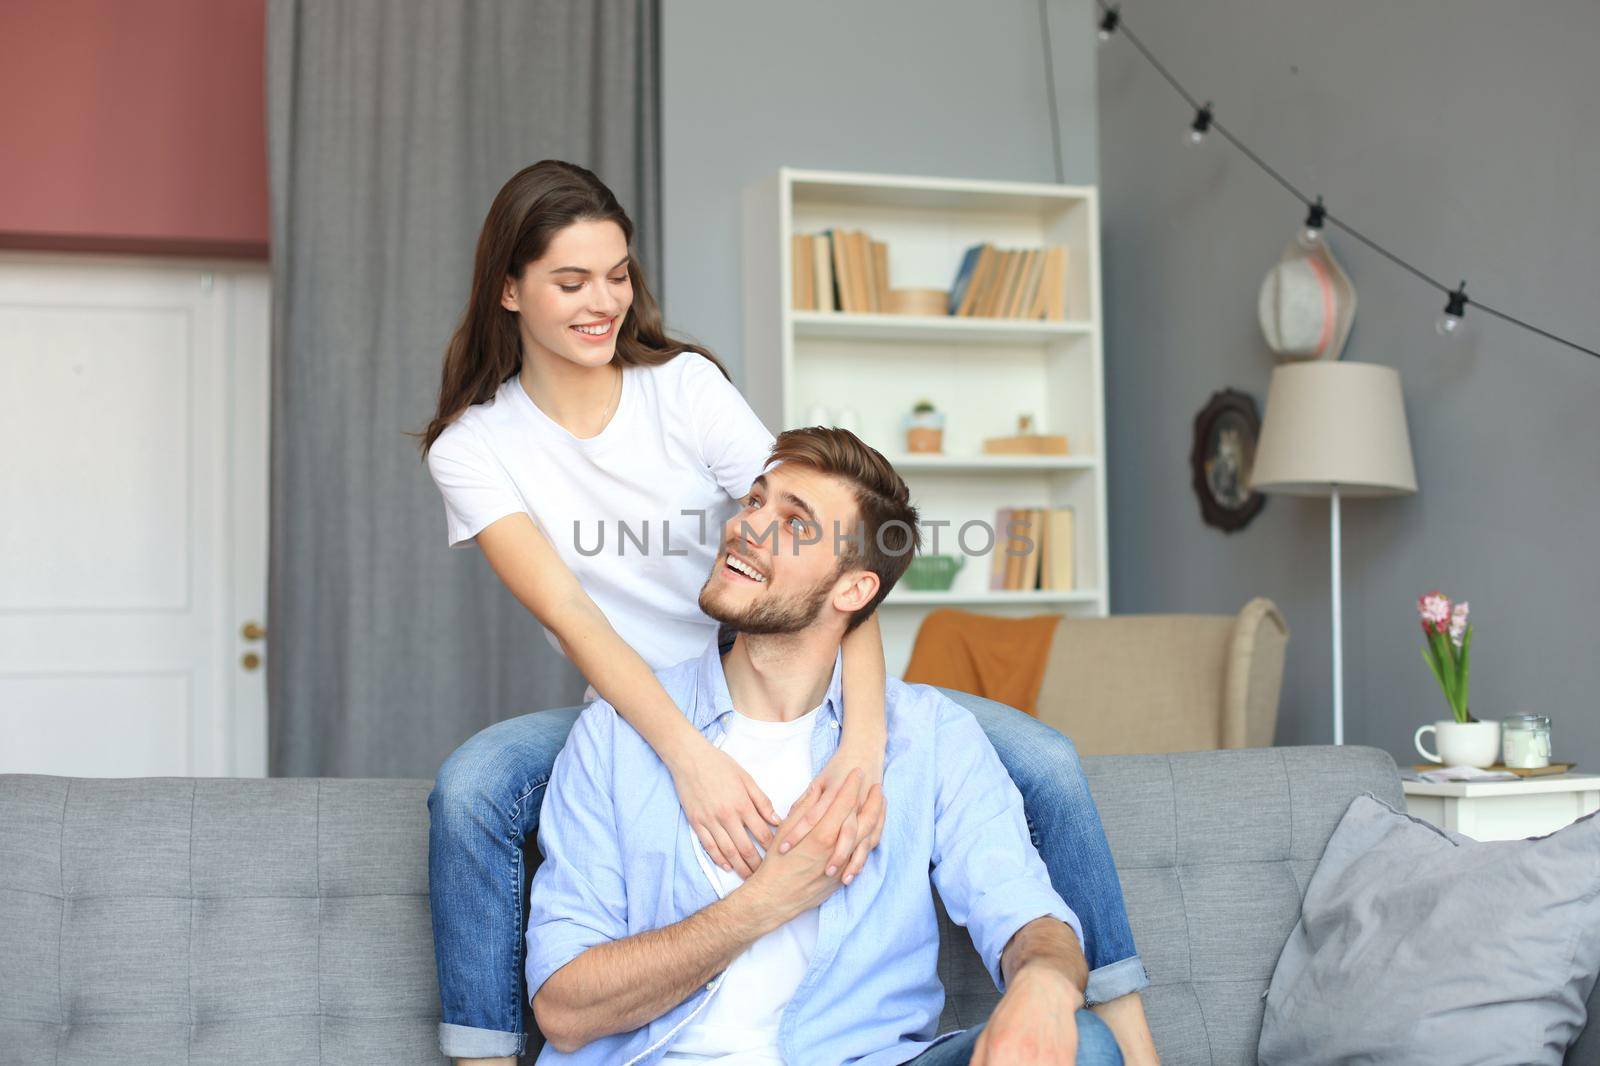 Beautiful woman with boyfriend spending quality time together on sofa at home in the living room